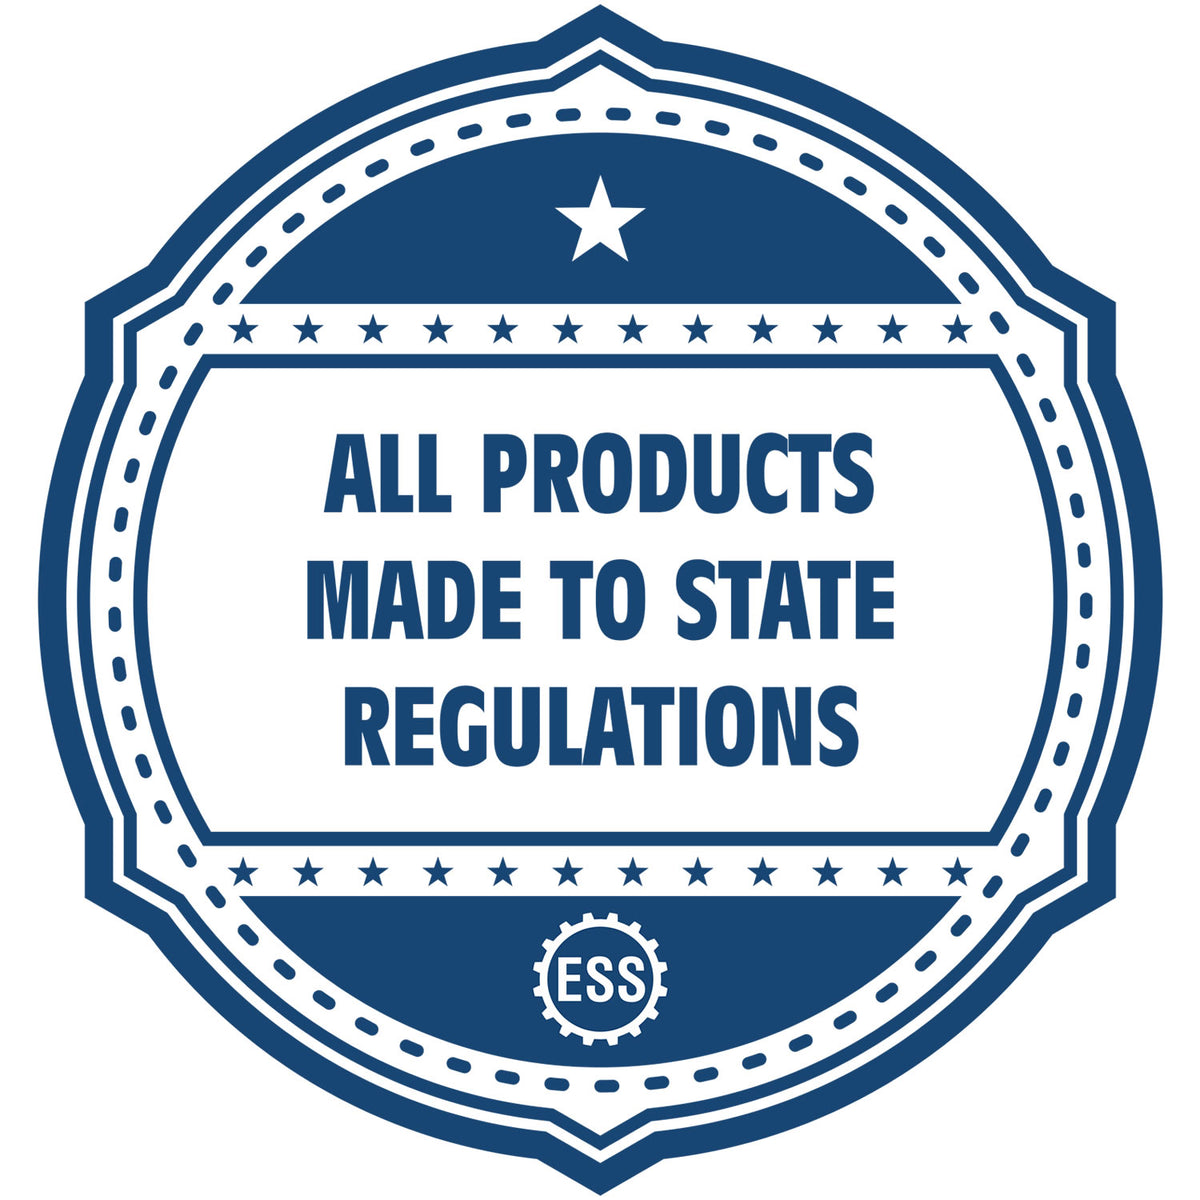 An icon or badge element for the Minnesota Professional Engineer Seal Stamp showing that this product is made in compliance with state regulations.